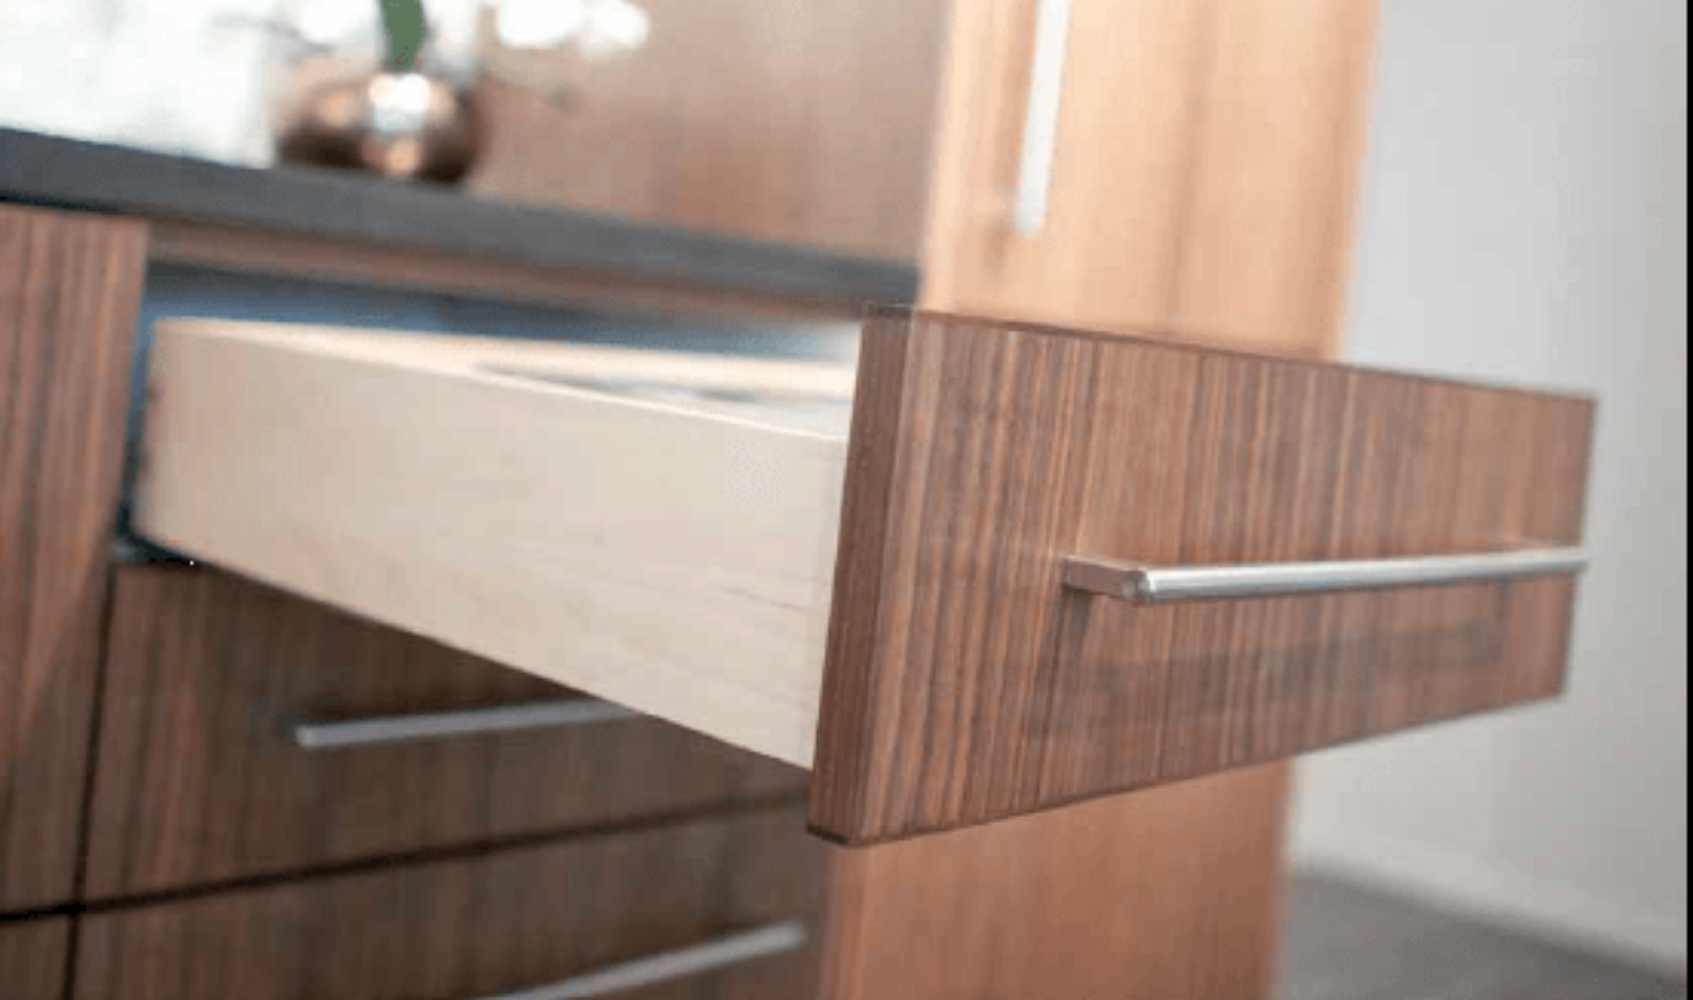 Soft-Close Undermount Drawer Glides - Cabinet Doors 'N' More